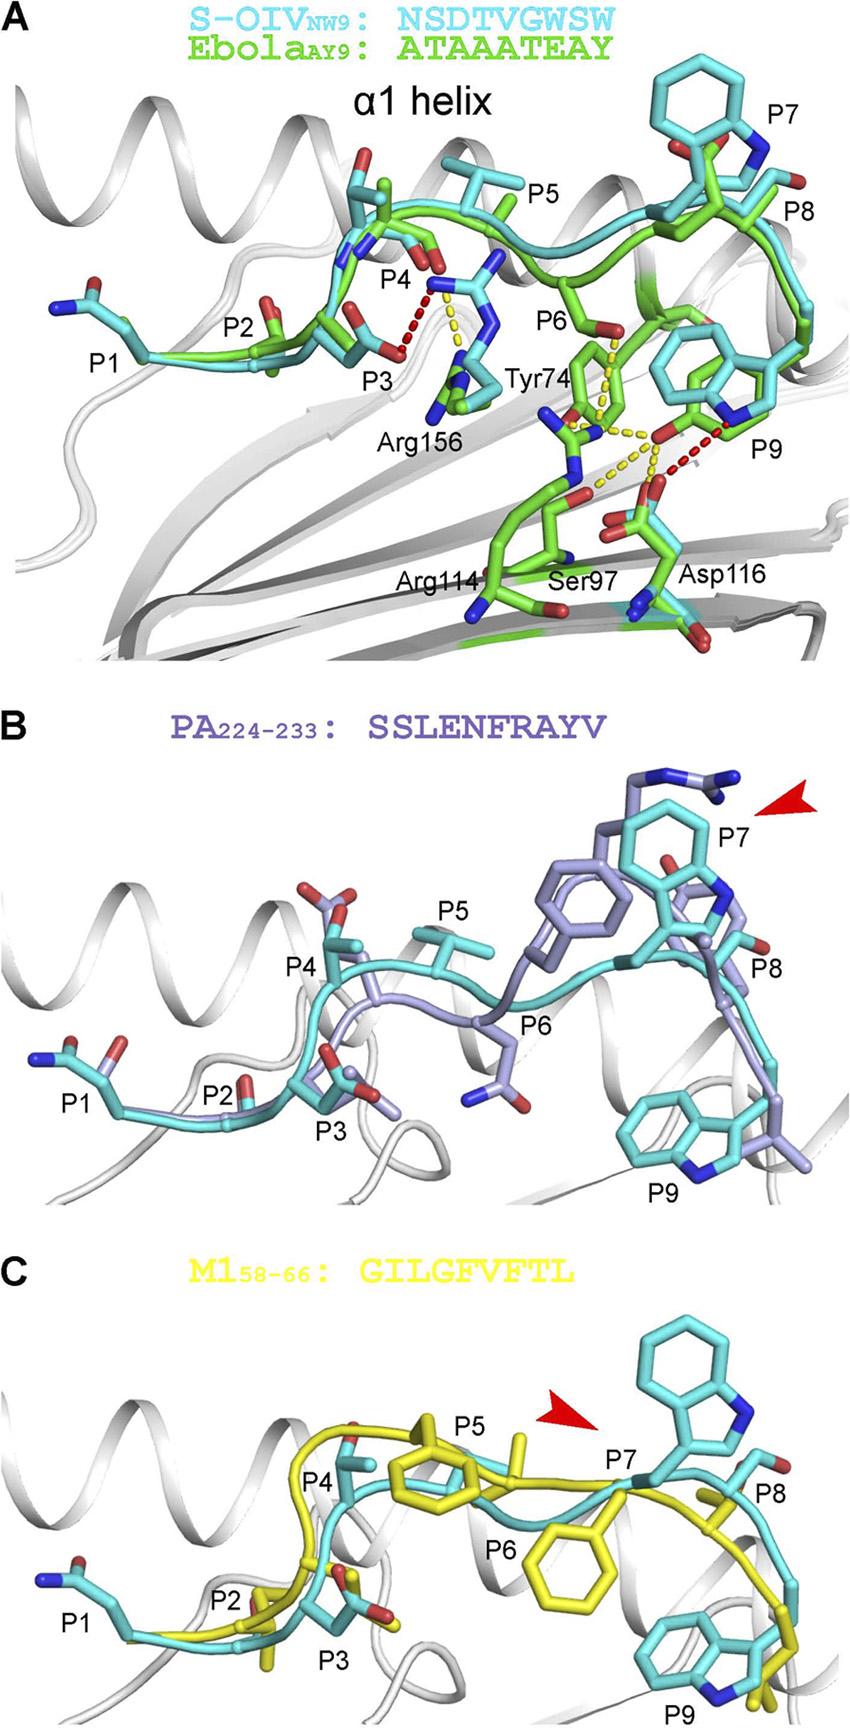 11718 ZHANG ET AL. J. VIROL. FIG. 6. Conformational comparison of S-OIV NW9, Ebola AY9, and peptides of IV with featured and featureless conformations.